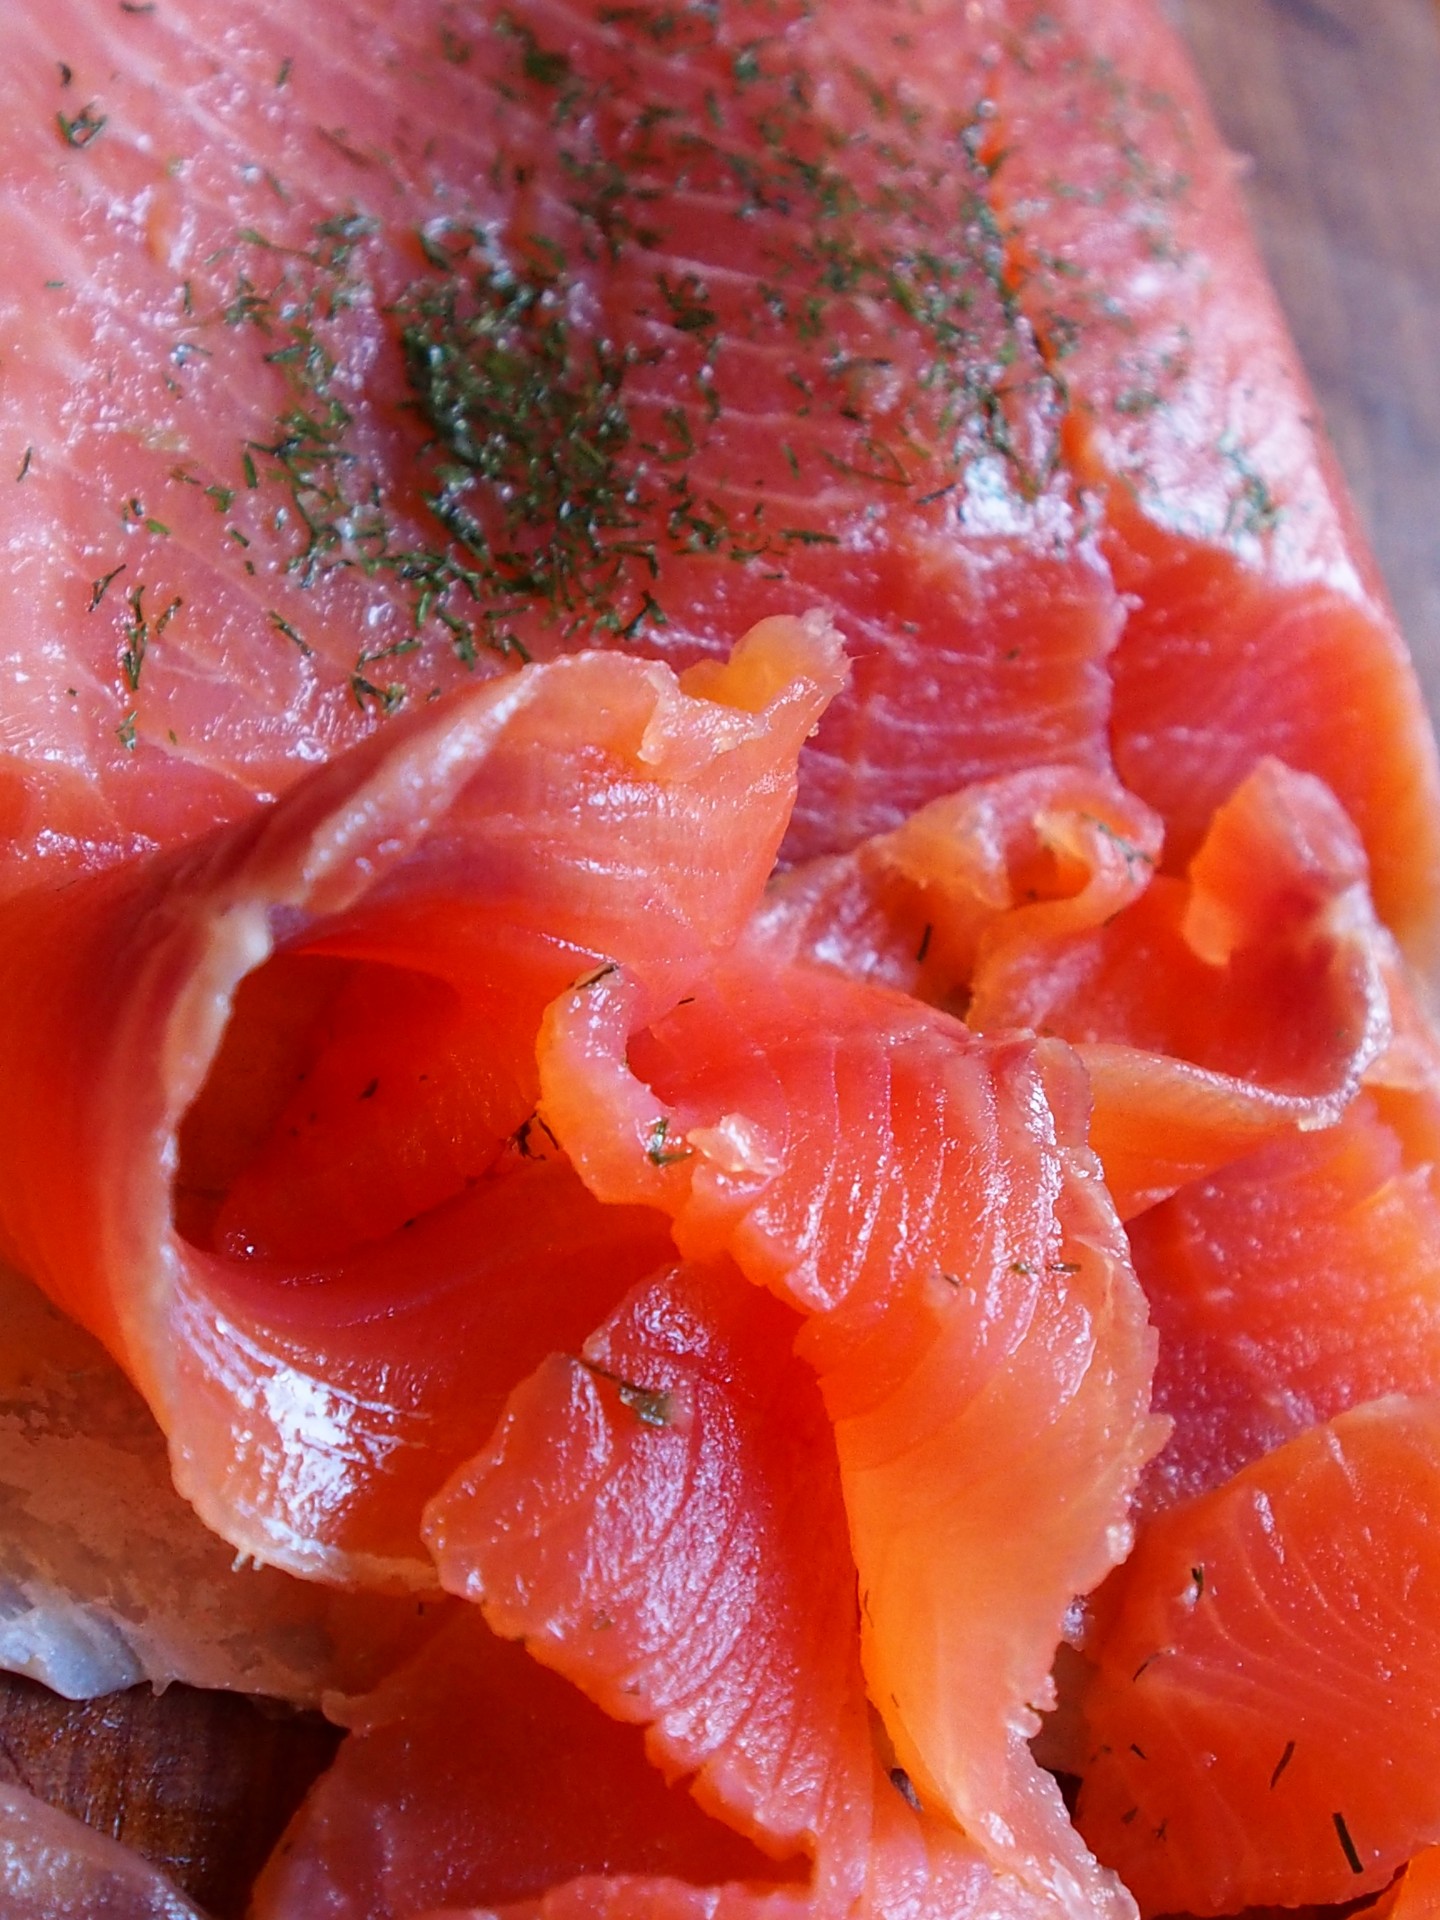 Lox and a Schmear